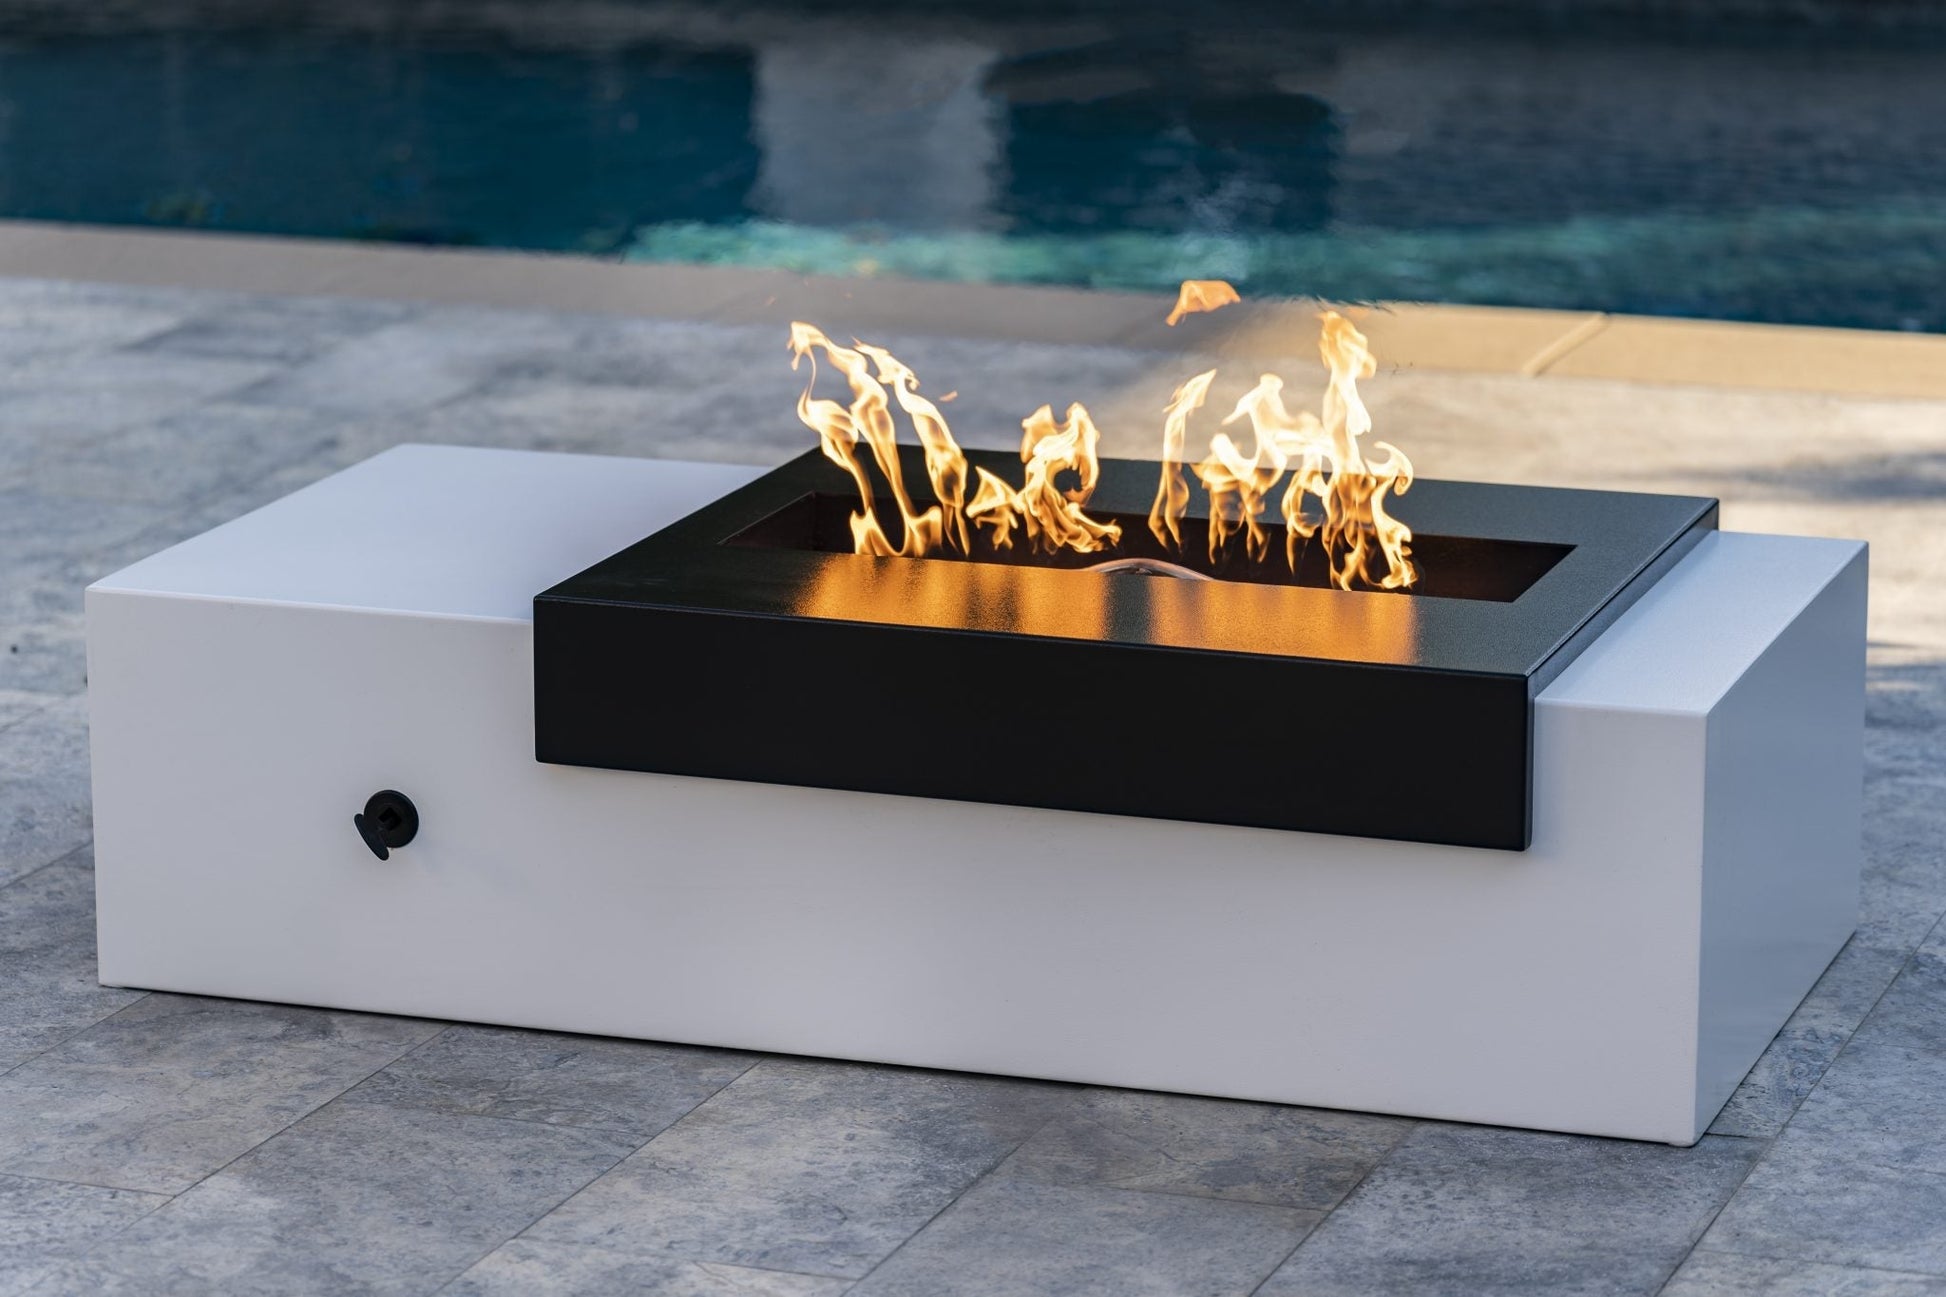 The Outdoor Plus Moonstone Black & White 72" Powder Coated Metal Fire Pit Propane Gas with 110V Electronic Ignition